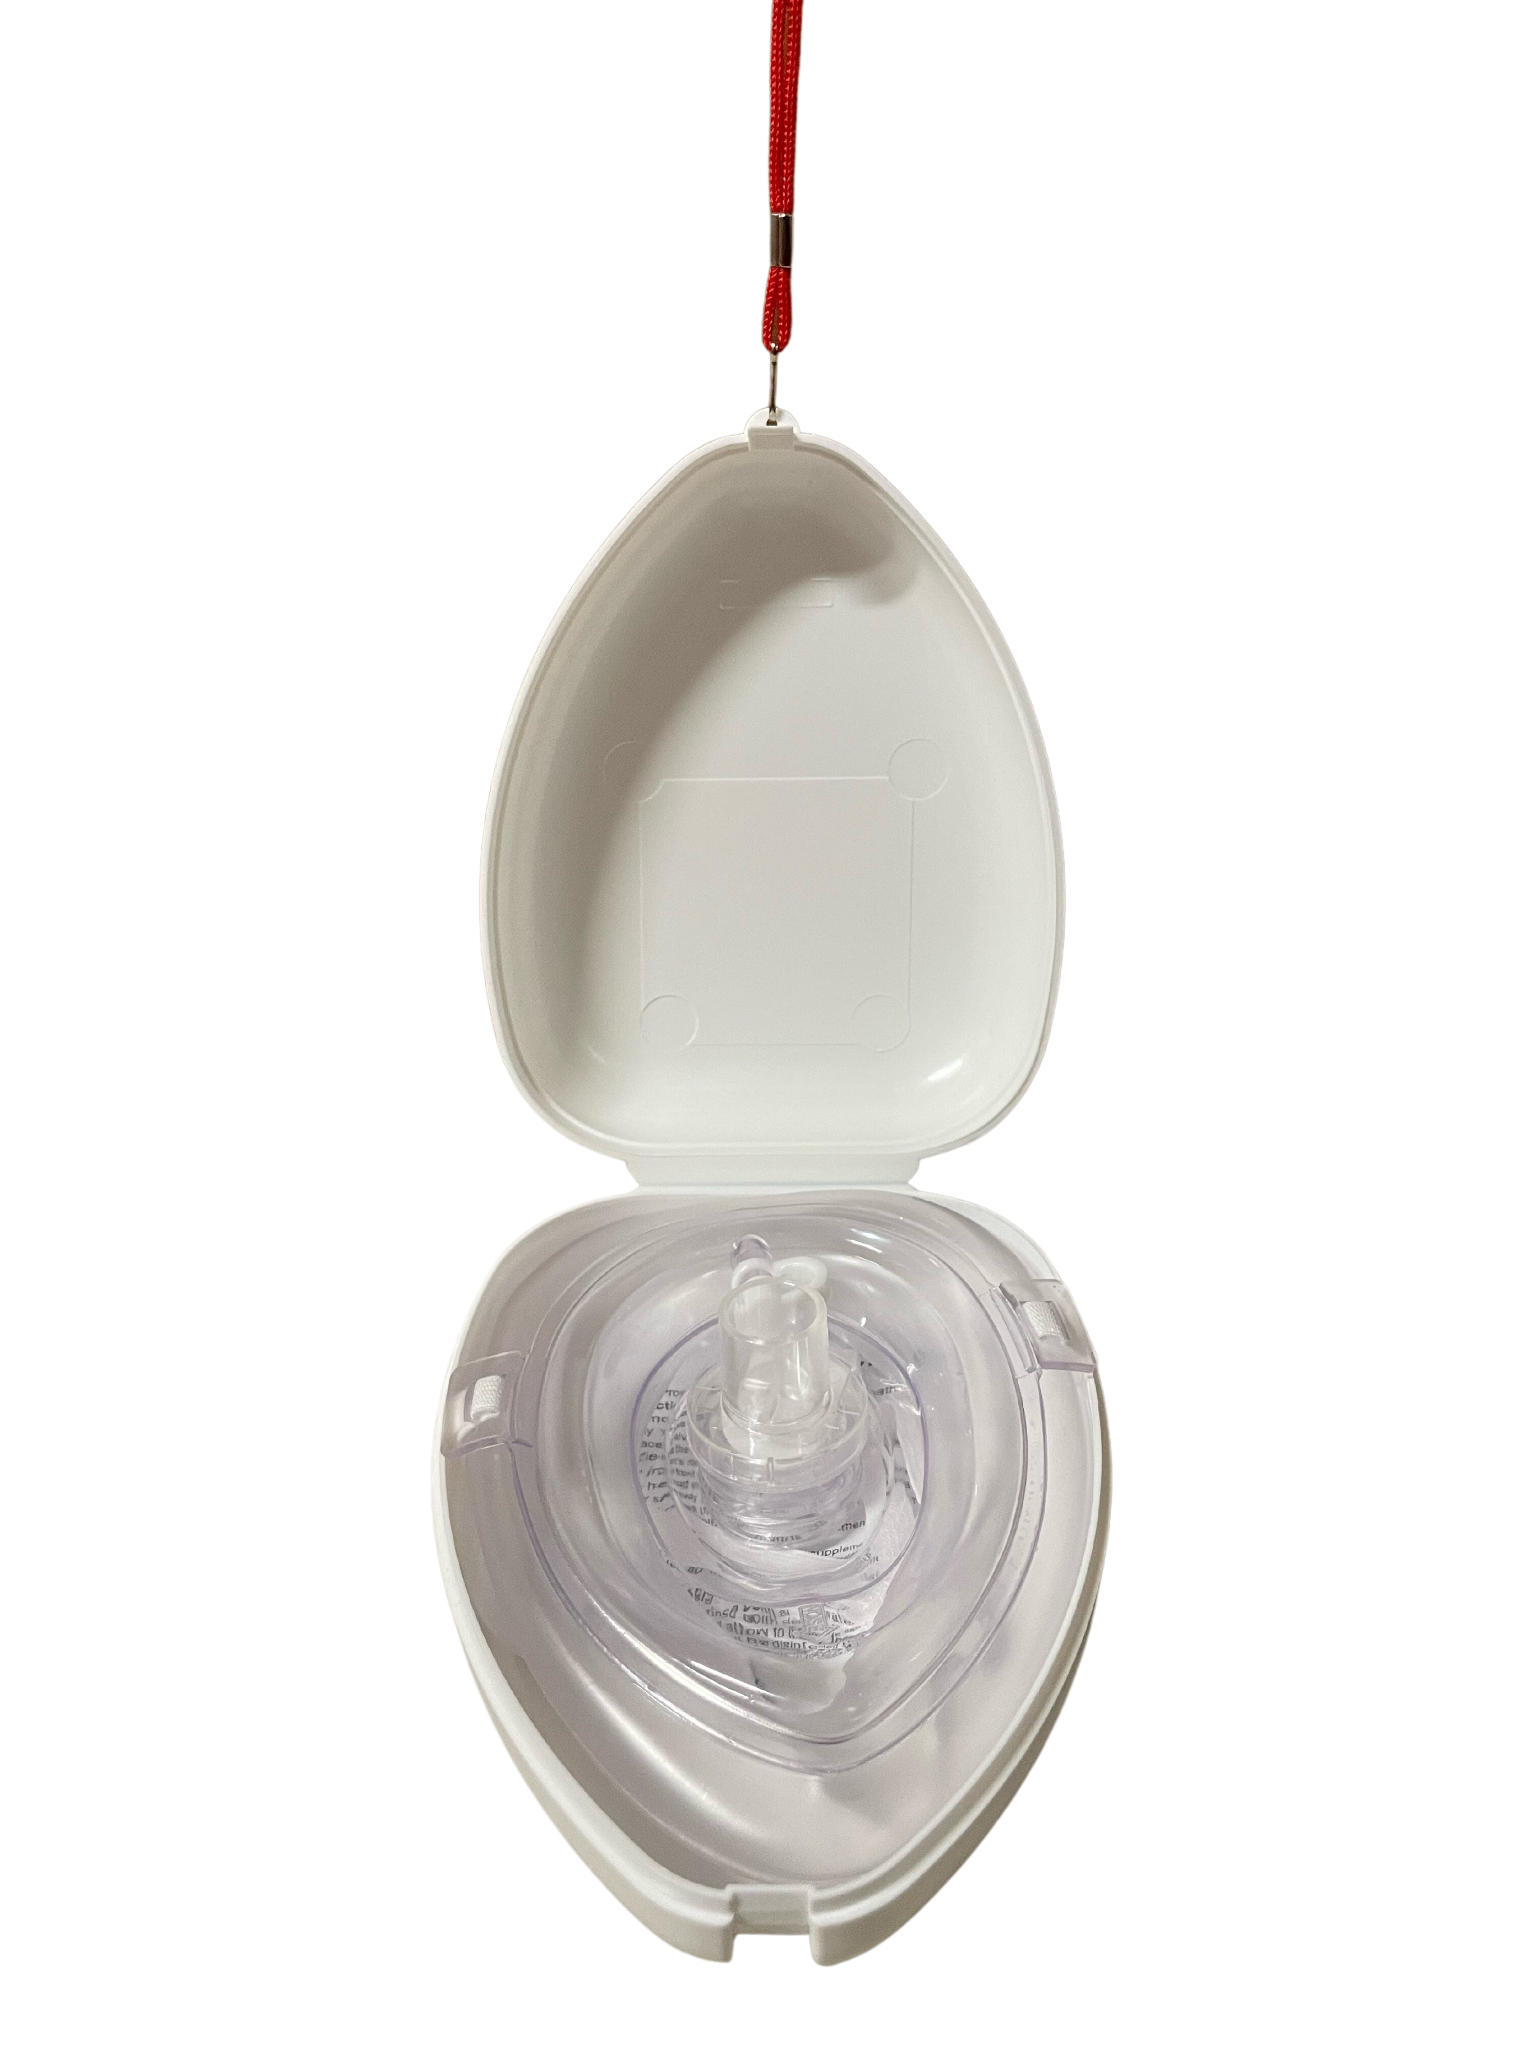 CPR Pocket Mask with O2 Inlet in Clamshell Case image